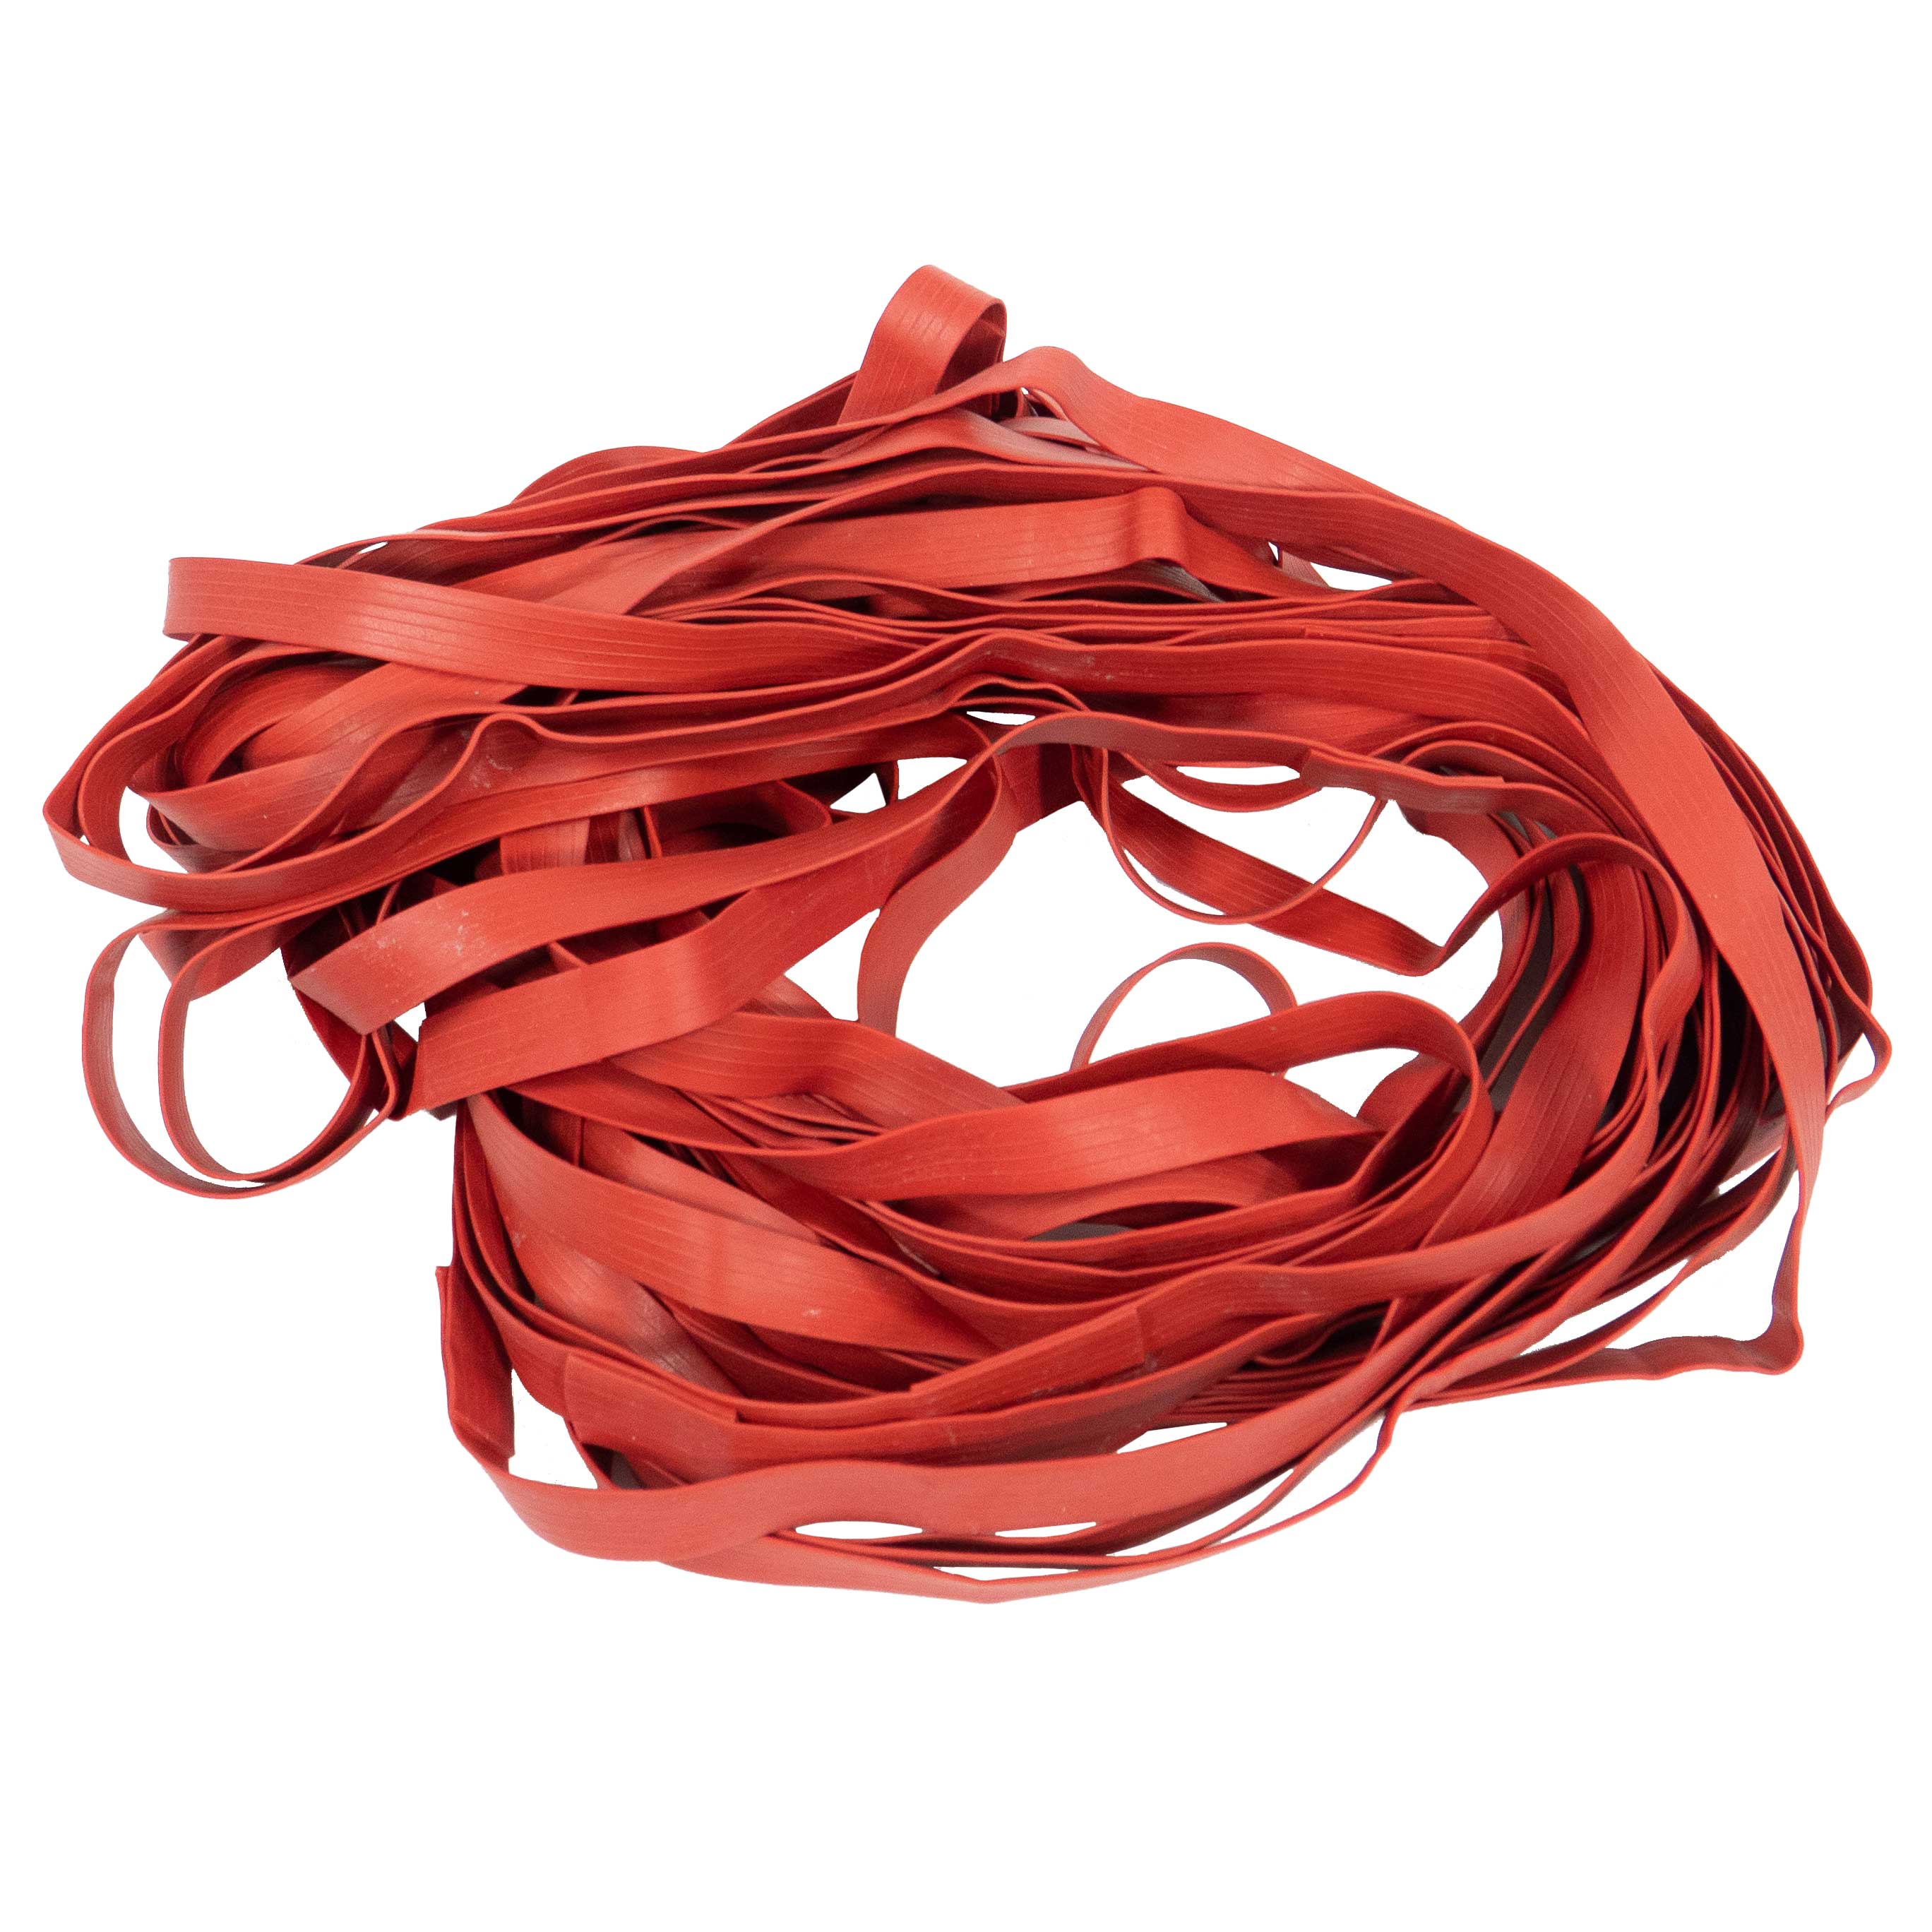 72 Wholesale Red, Black, And White Mini Rubber Bands - at 